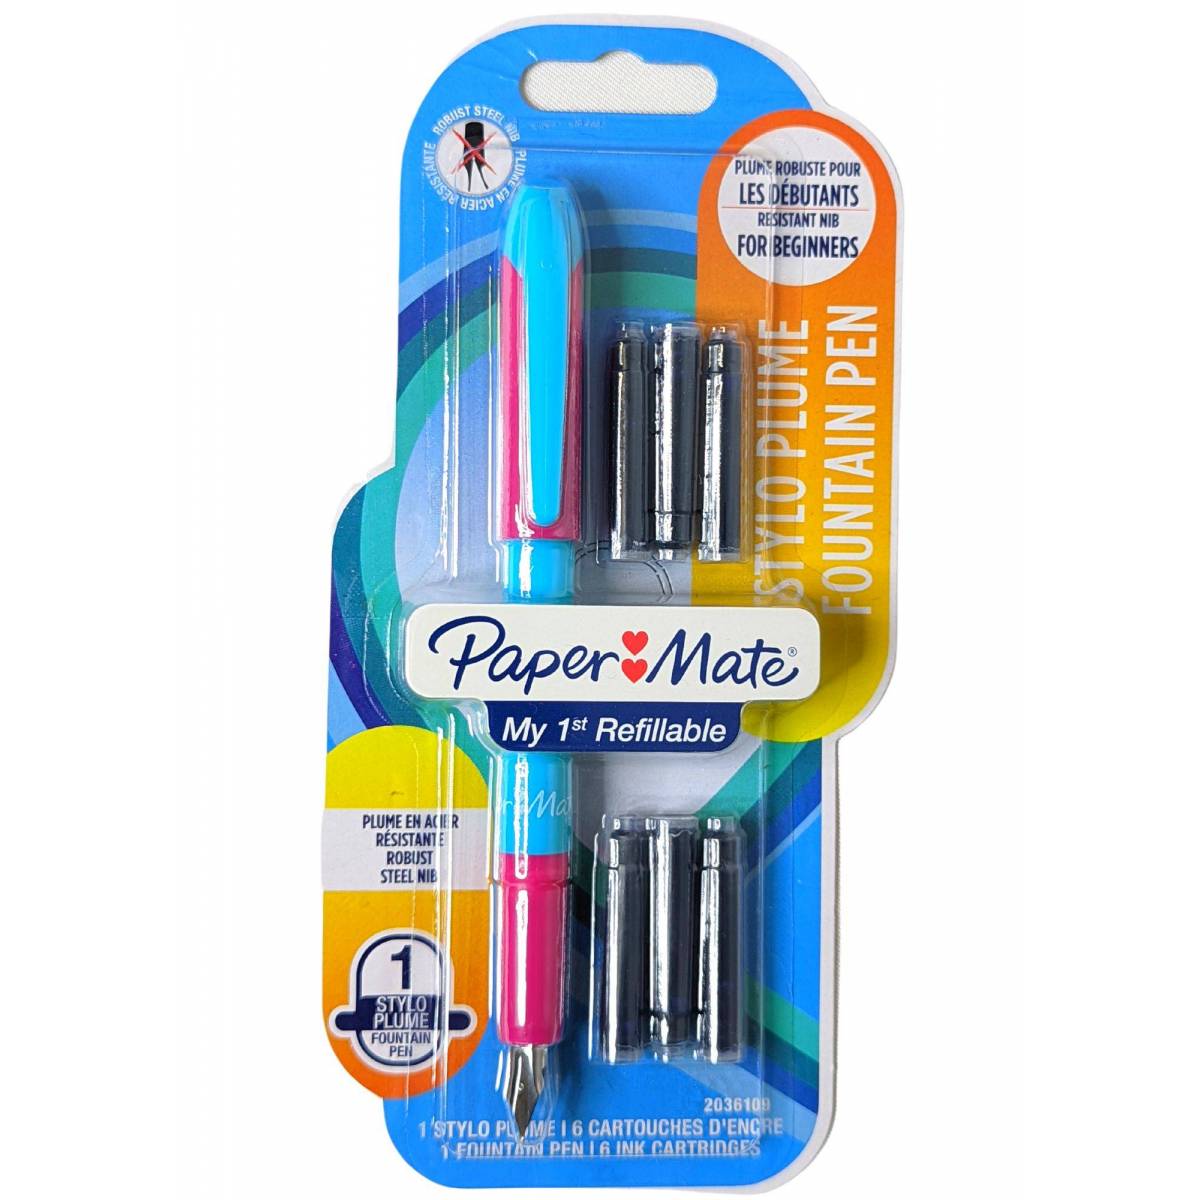 Fountain pen for beginners Paper Mate My First